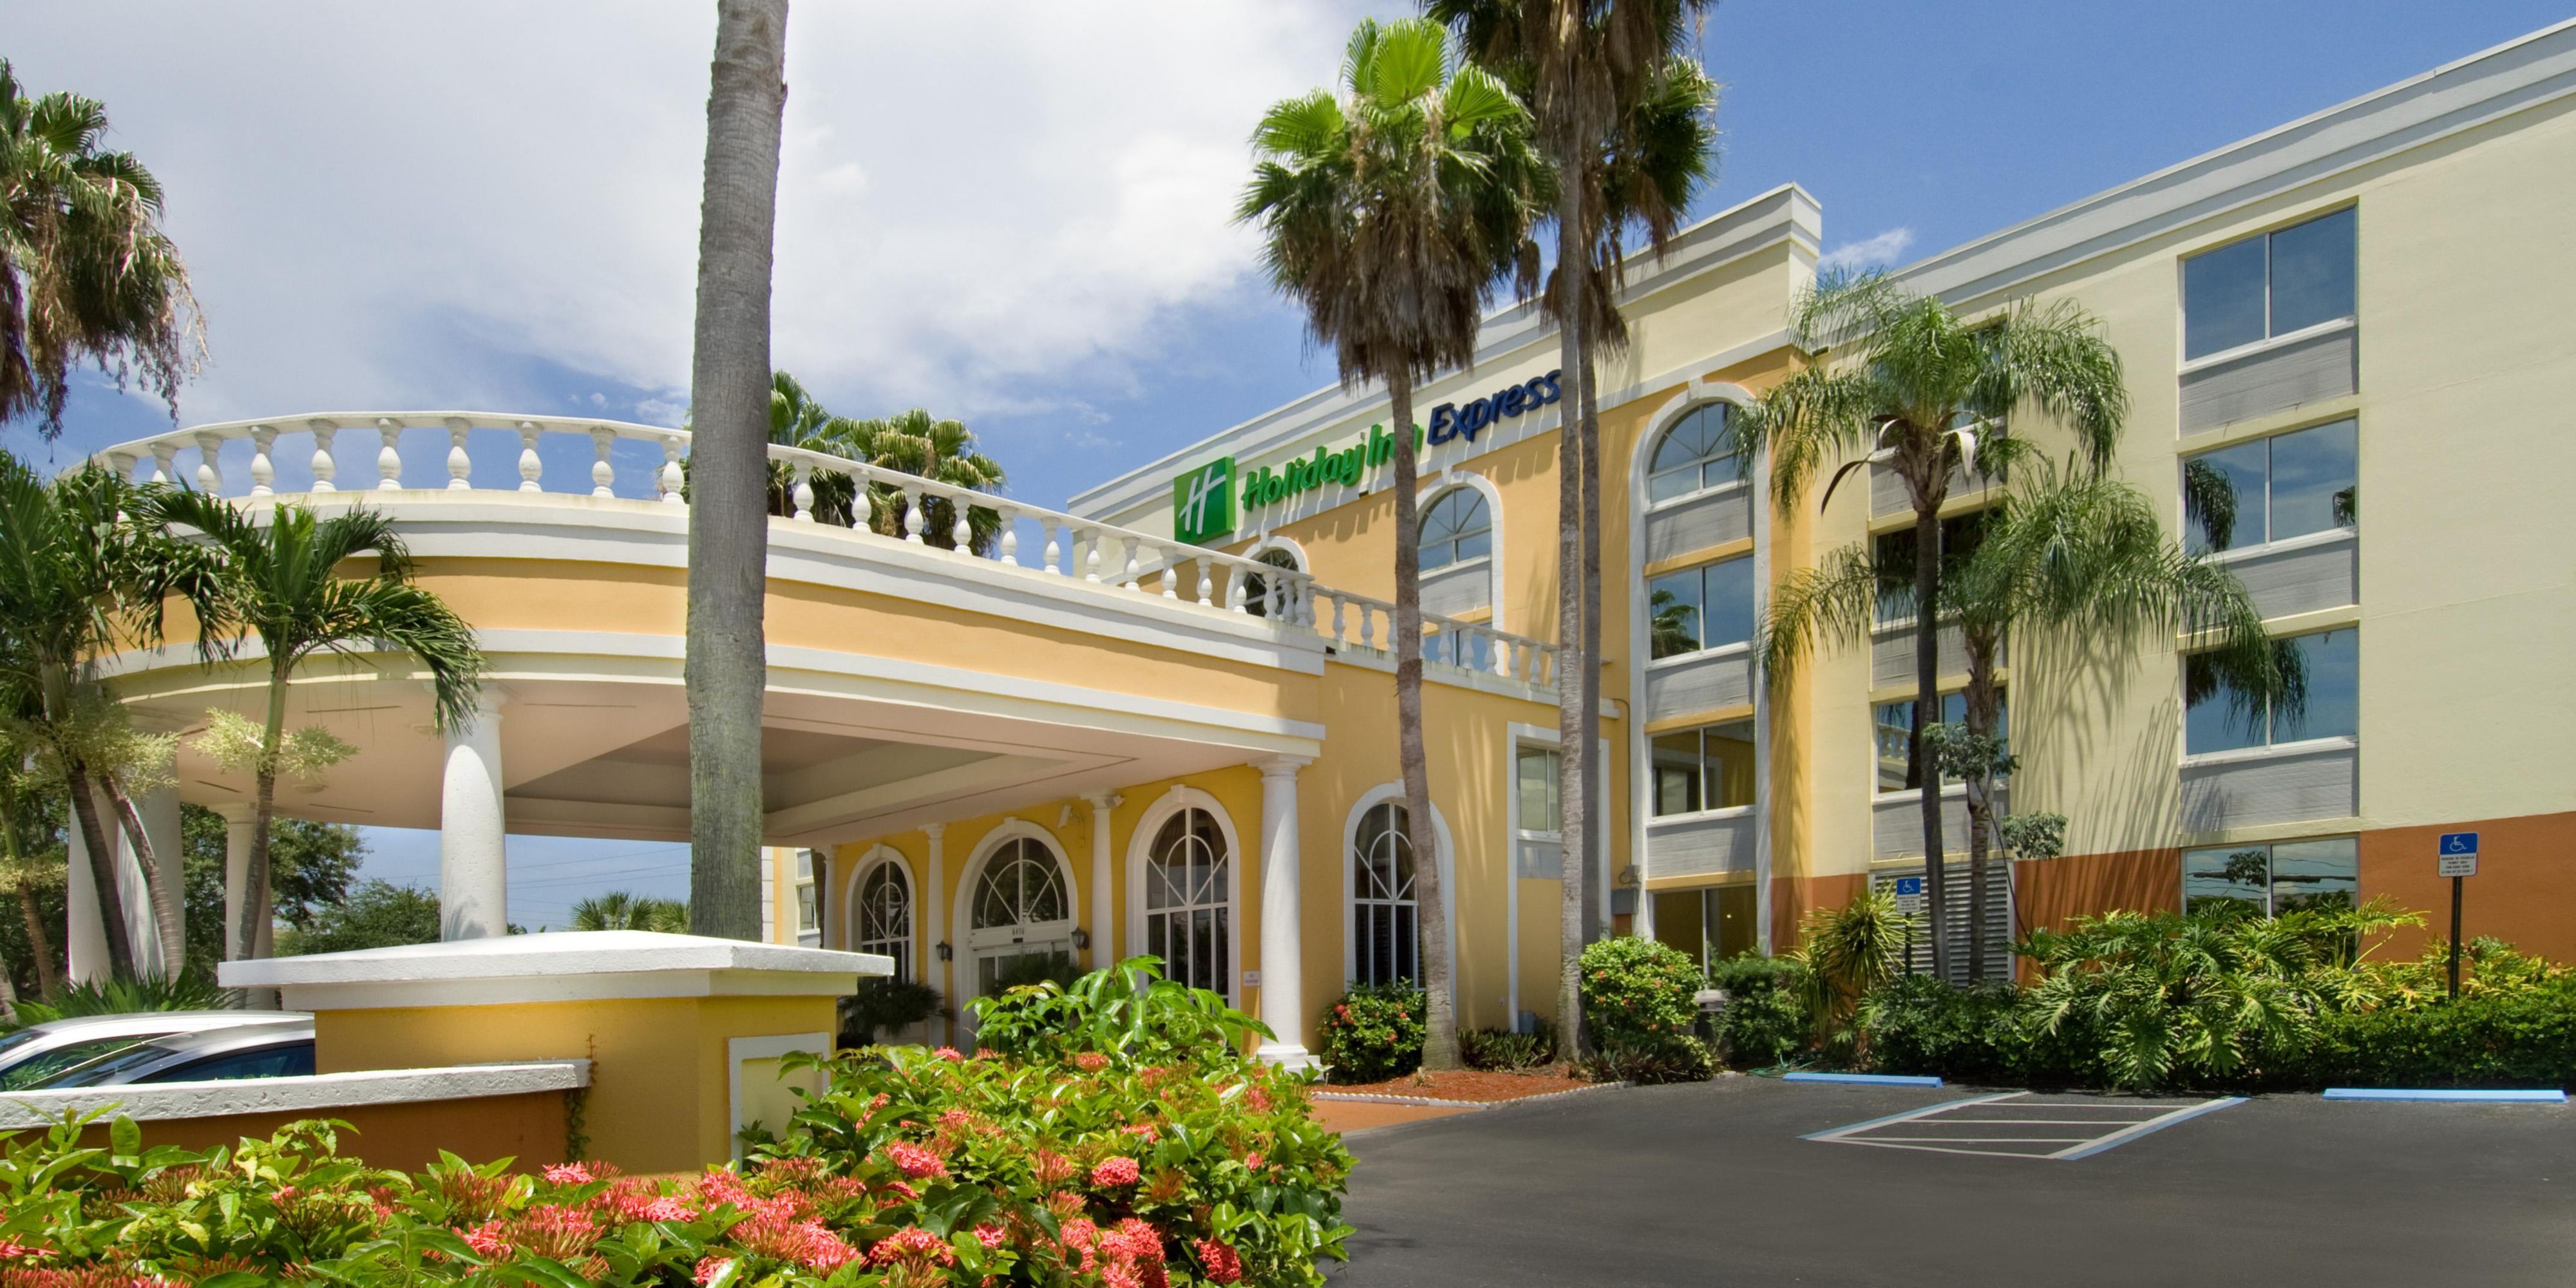 Book your block of rooms at the Holiday Inn Express Miami Doral. Call today for discounted pricing on groups of 10 or more rooms.